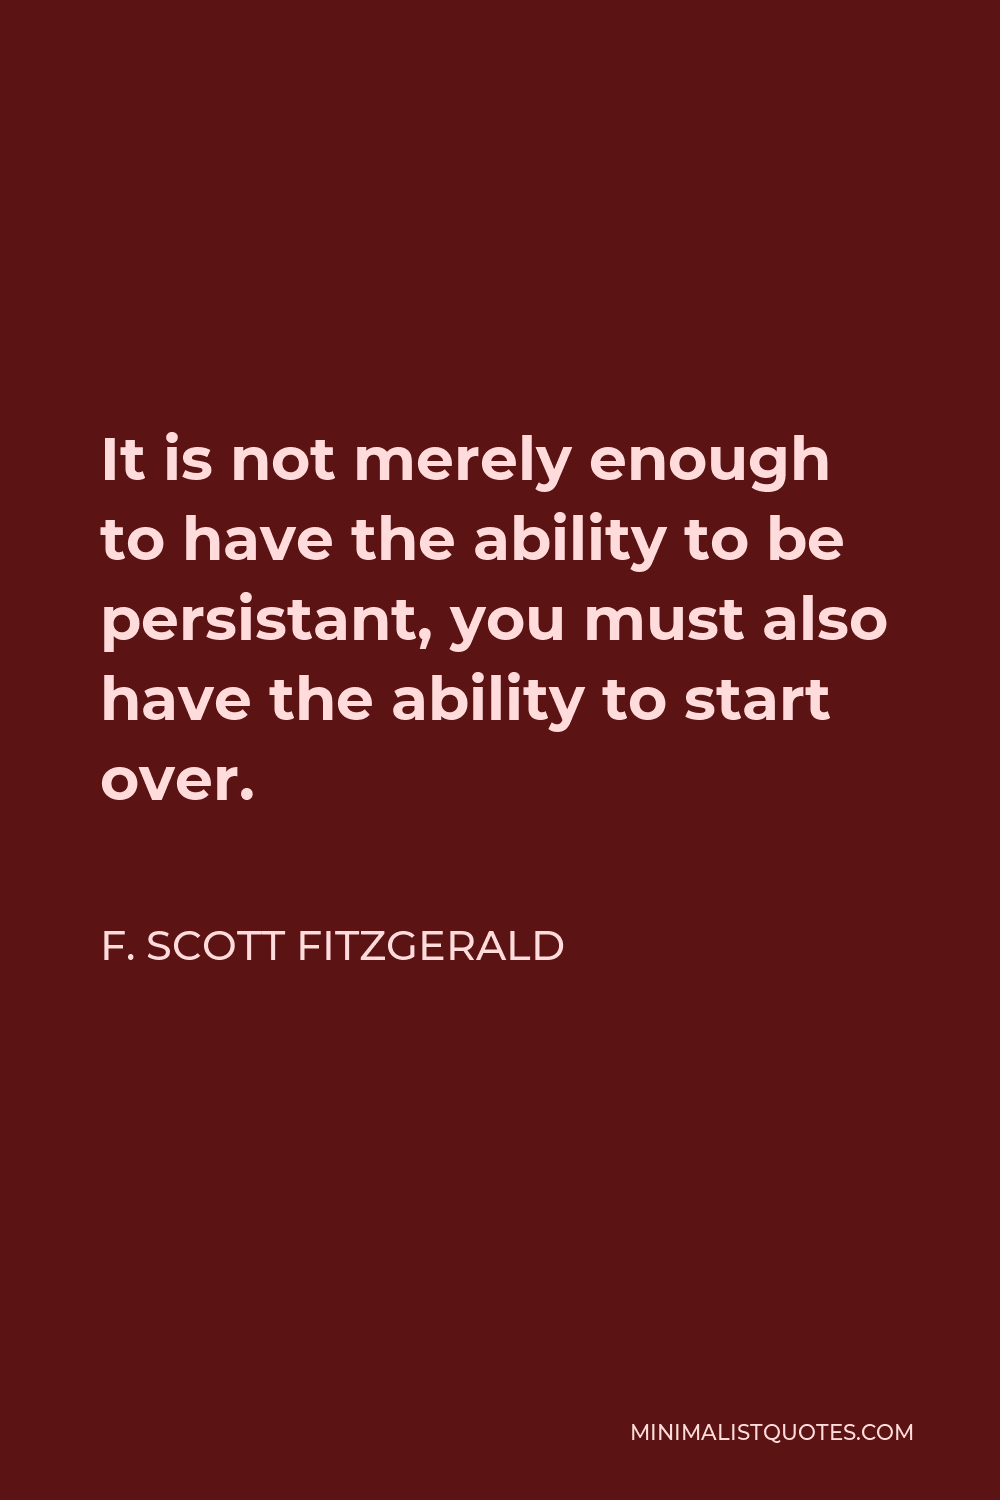 F. Scott Fitzgerald Quote - It is not merely enough to have the ability to be persistant, you must also have the ability to start over.